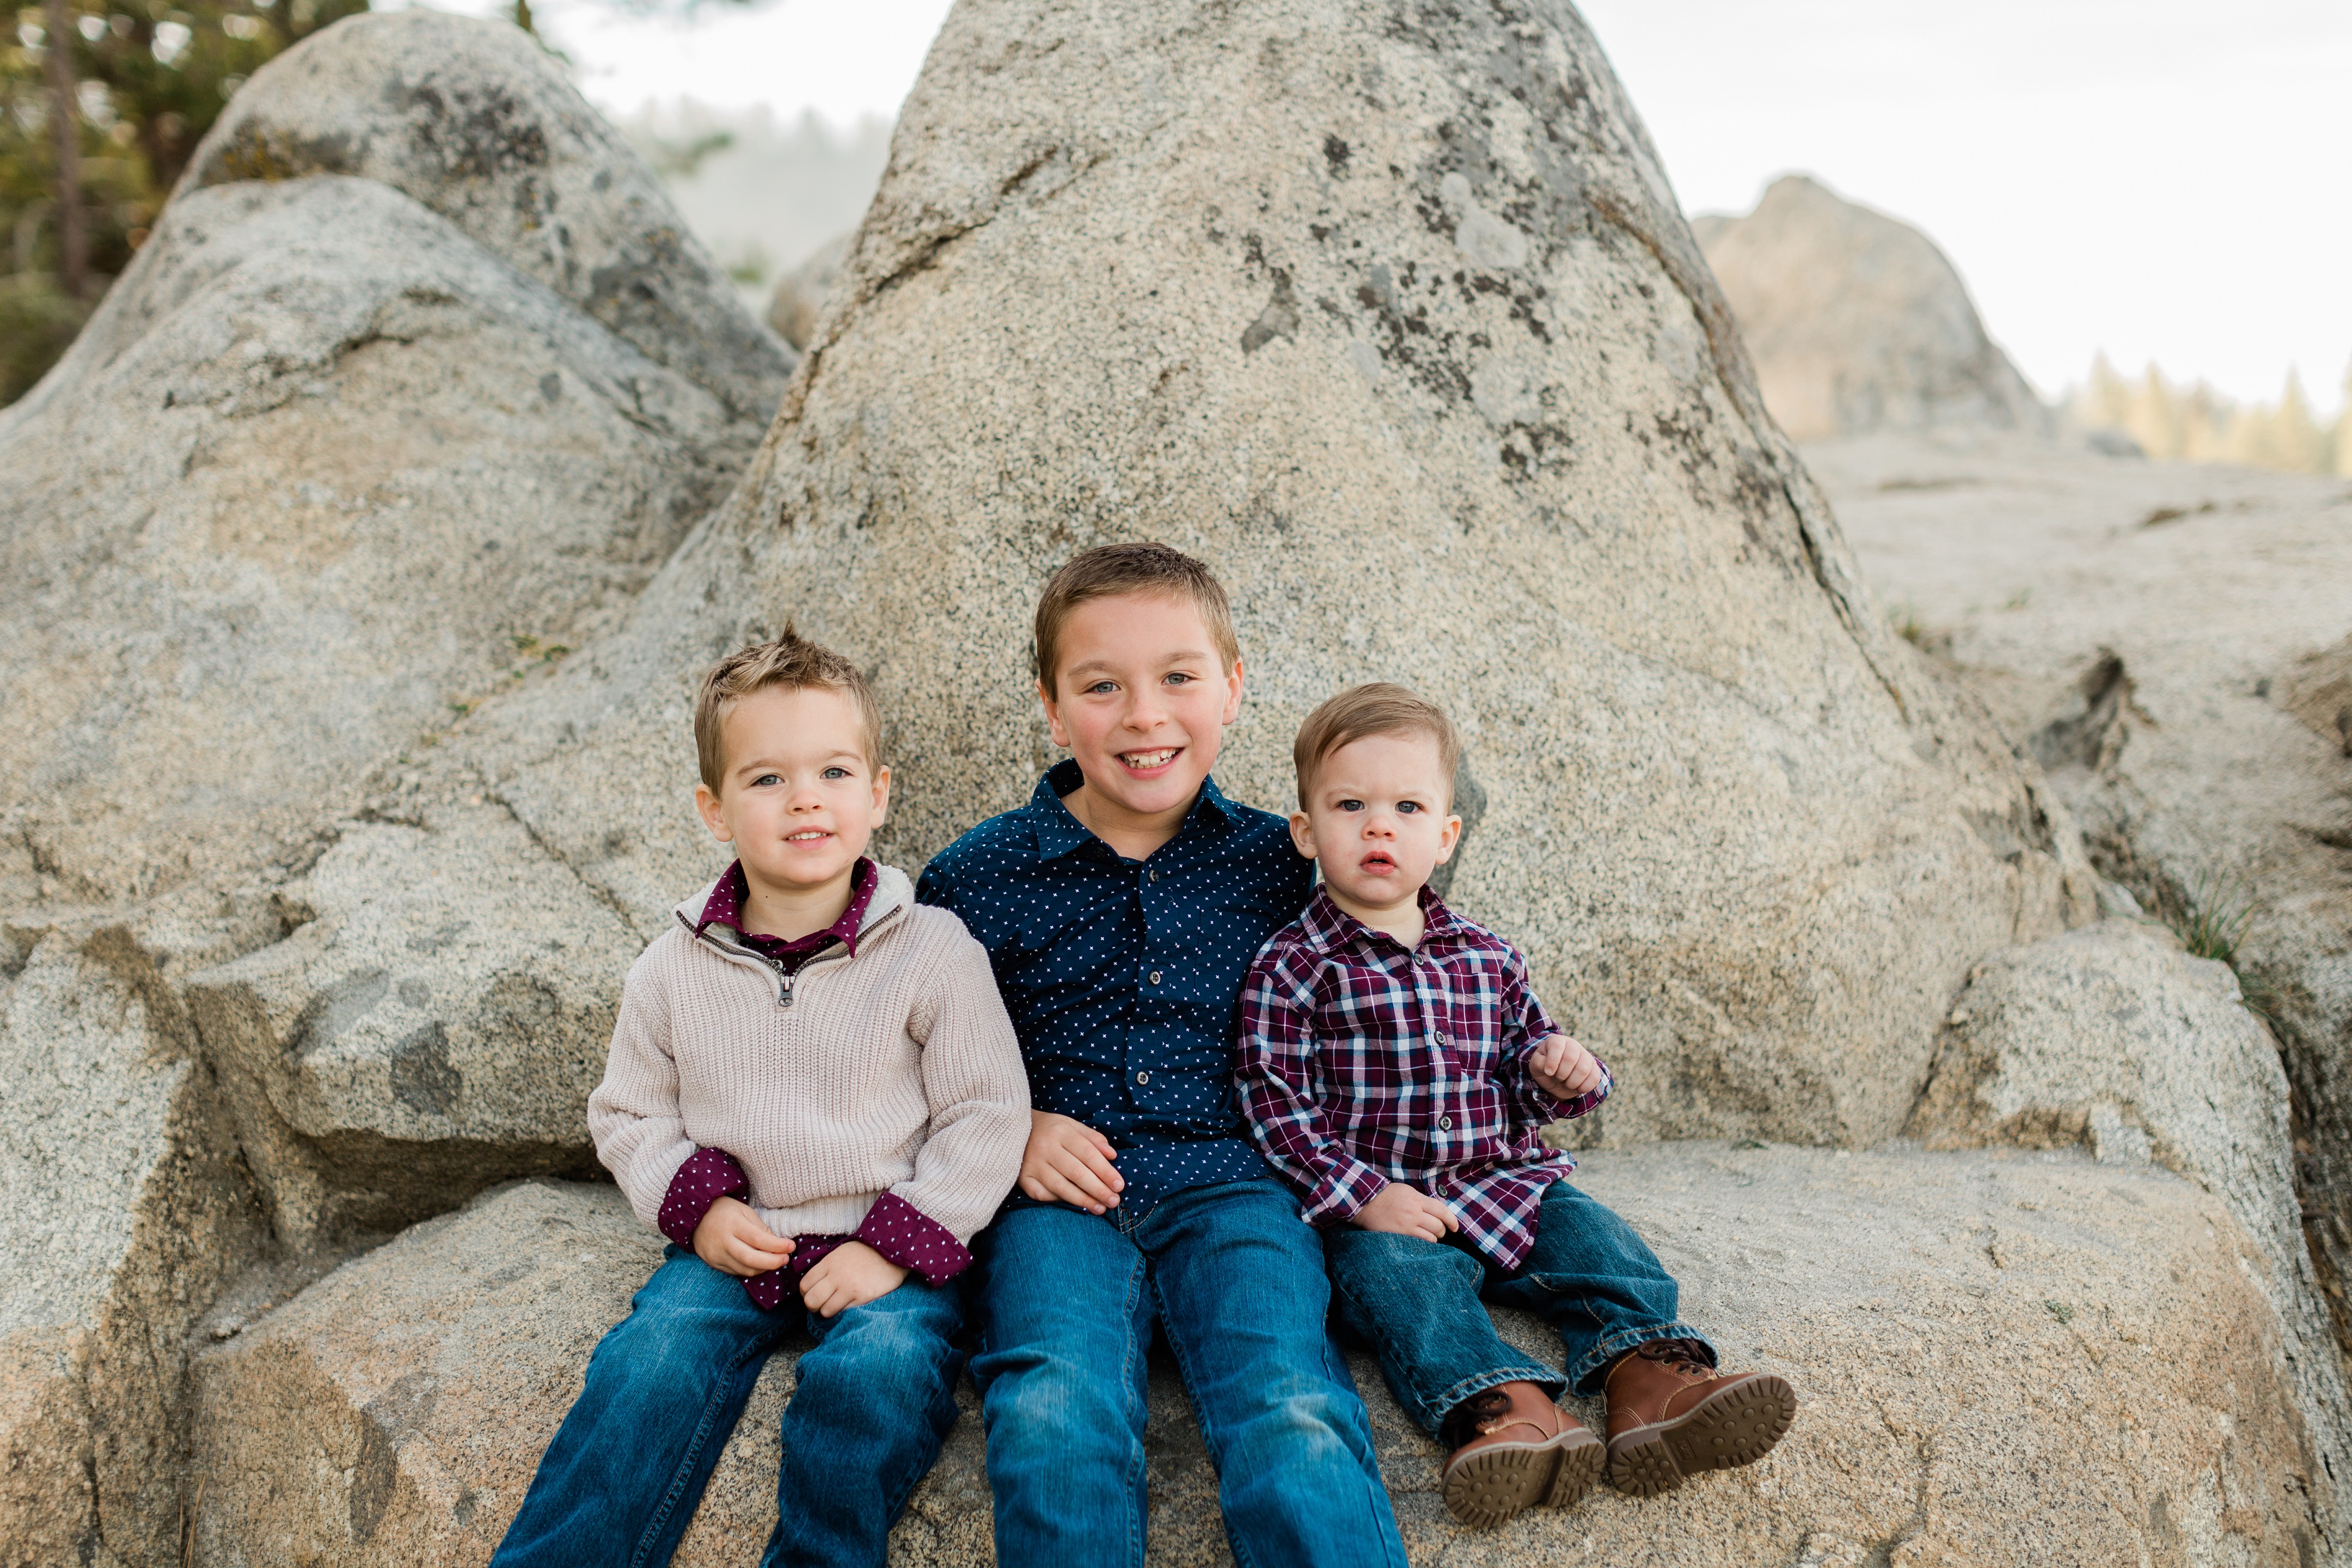 navy and maroon family photo outfits of boys sitting on a rock